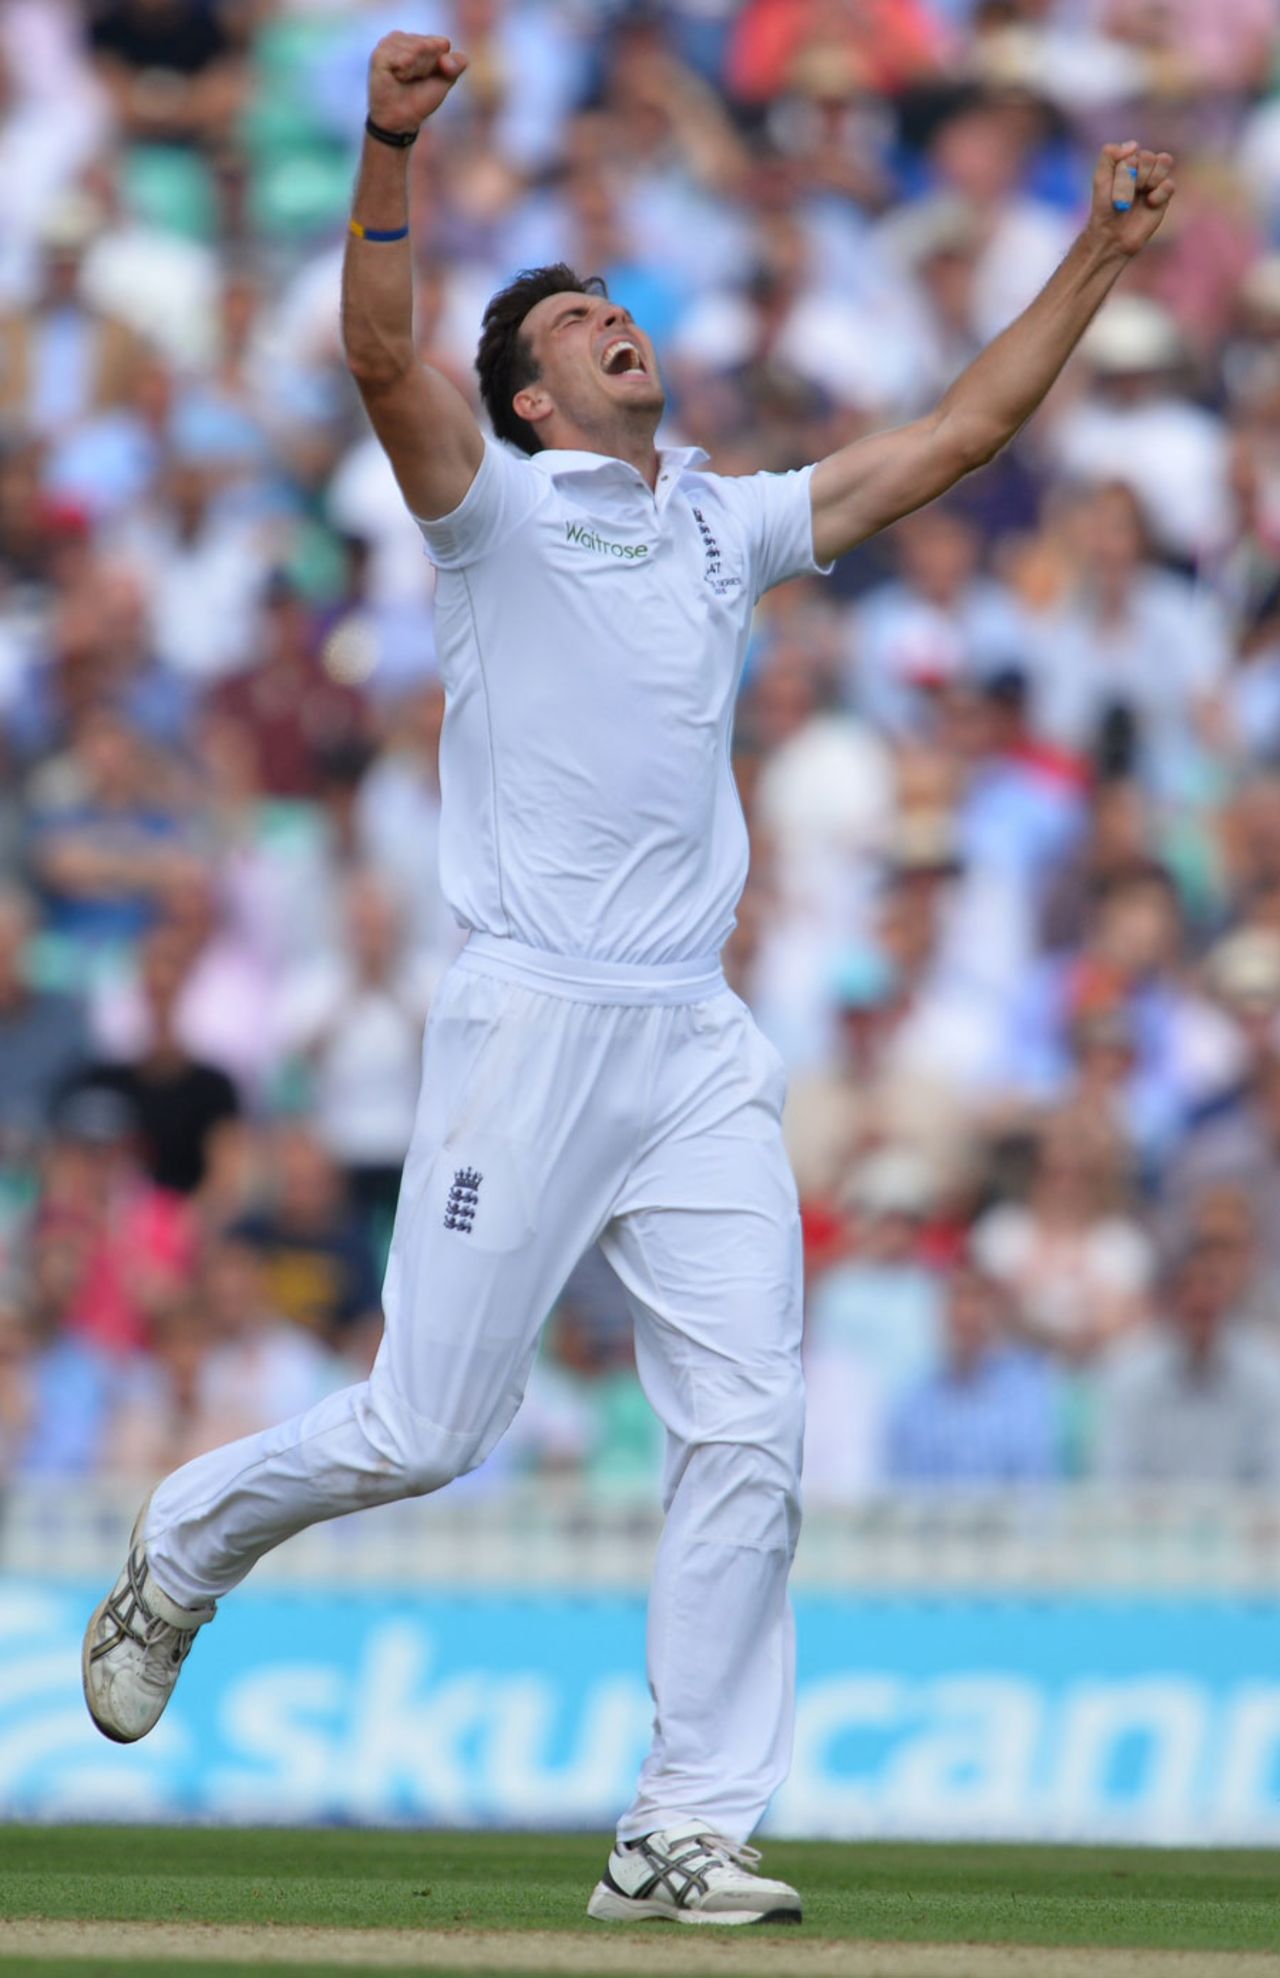 Steven Finn could finally celebrate,  England v Australia, 5th Investec Ashes Test, The Oval, 2nd day, August 21, 2015